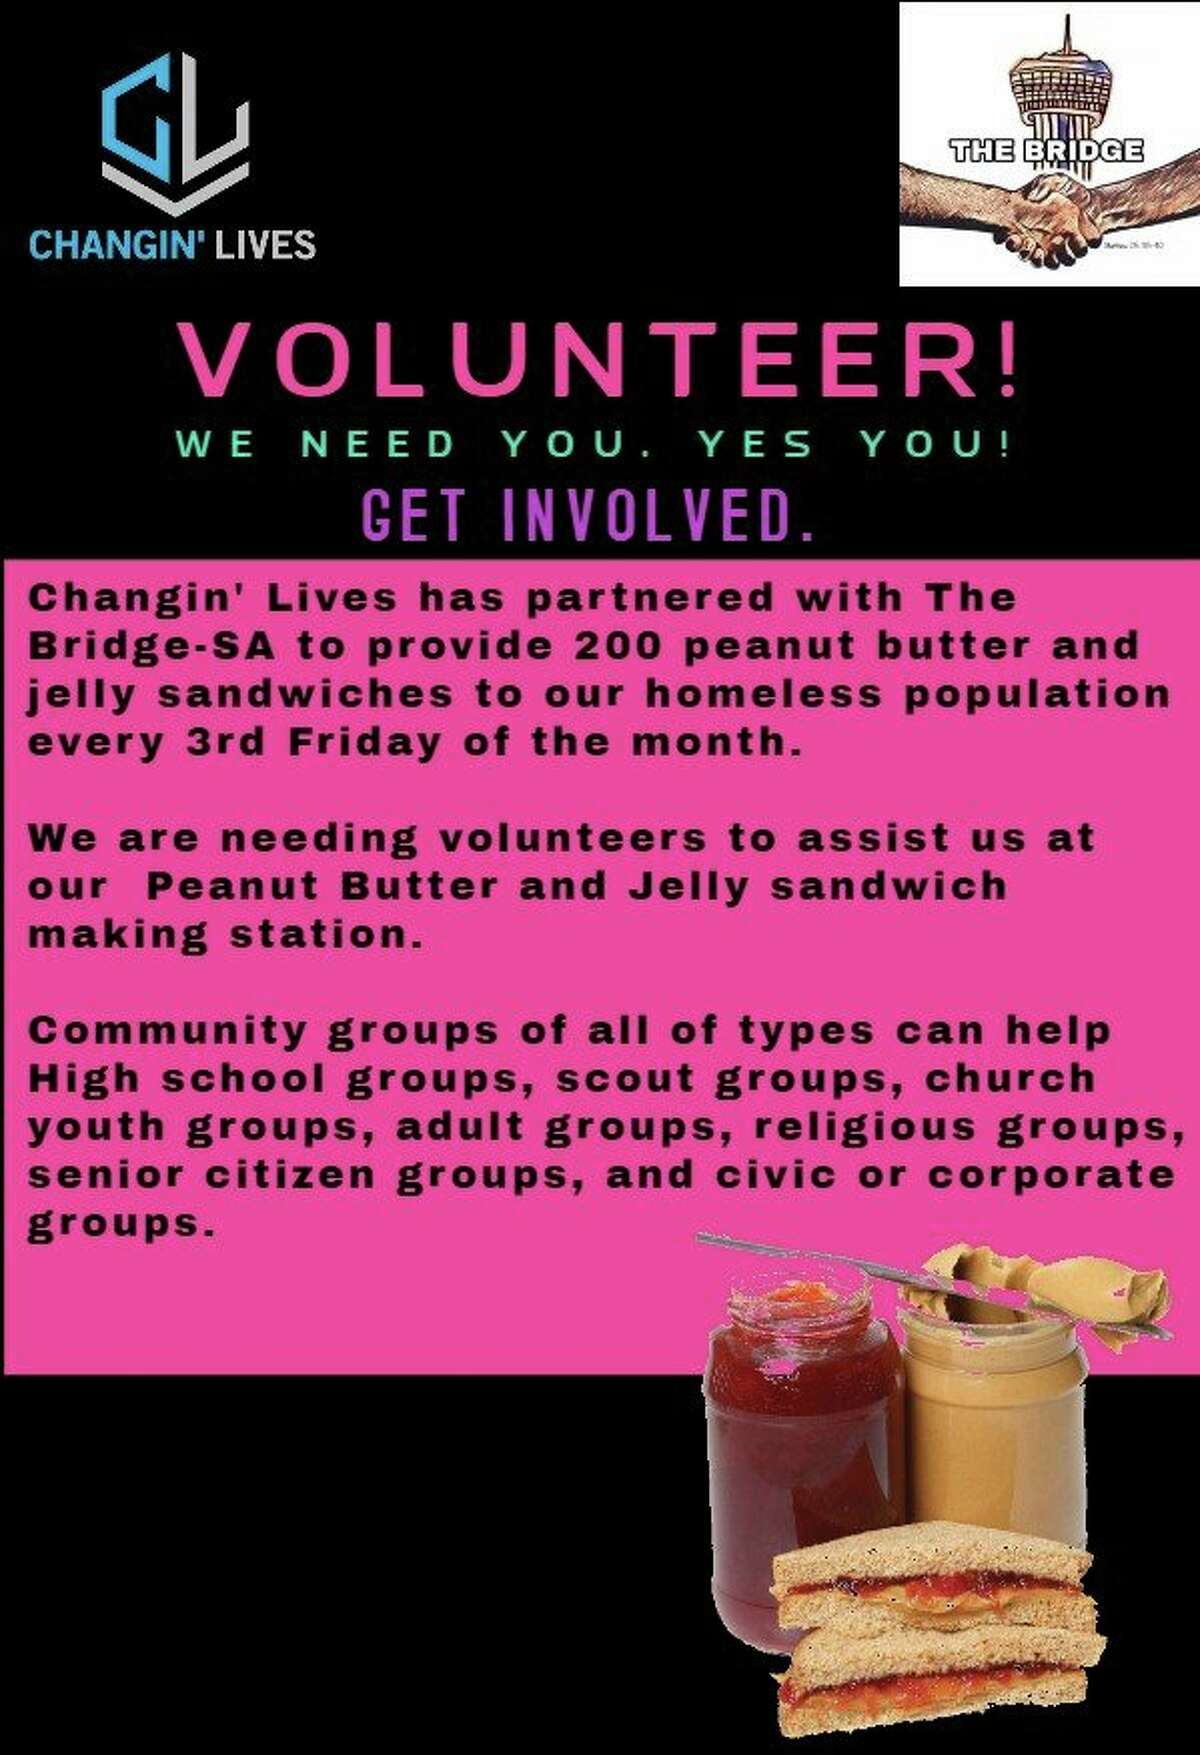 A local non-profit organization is looking for volunteers to help feed the homeless peanut butter and jelly sandwiches from 6 to 8 p.m. Friday in the parking lot at Christian Assistance Ministry, located at 110 McCullough Avenue.